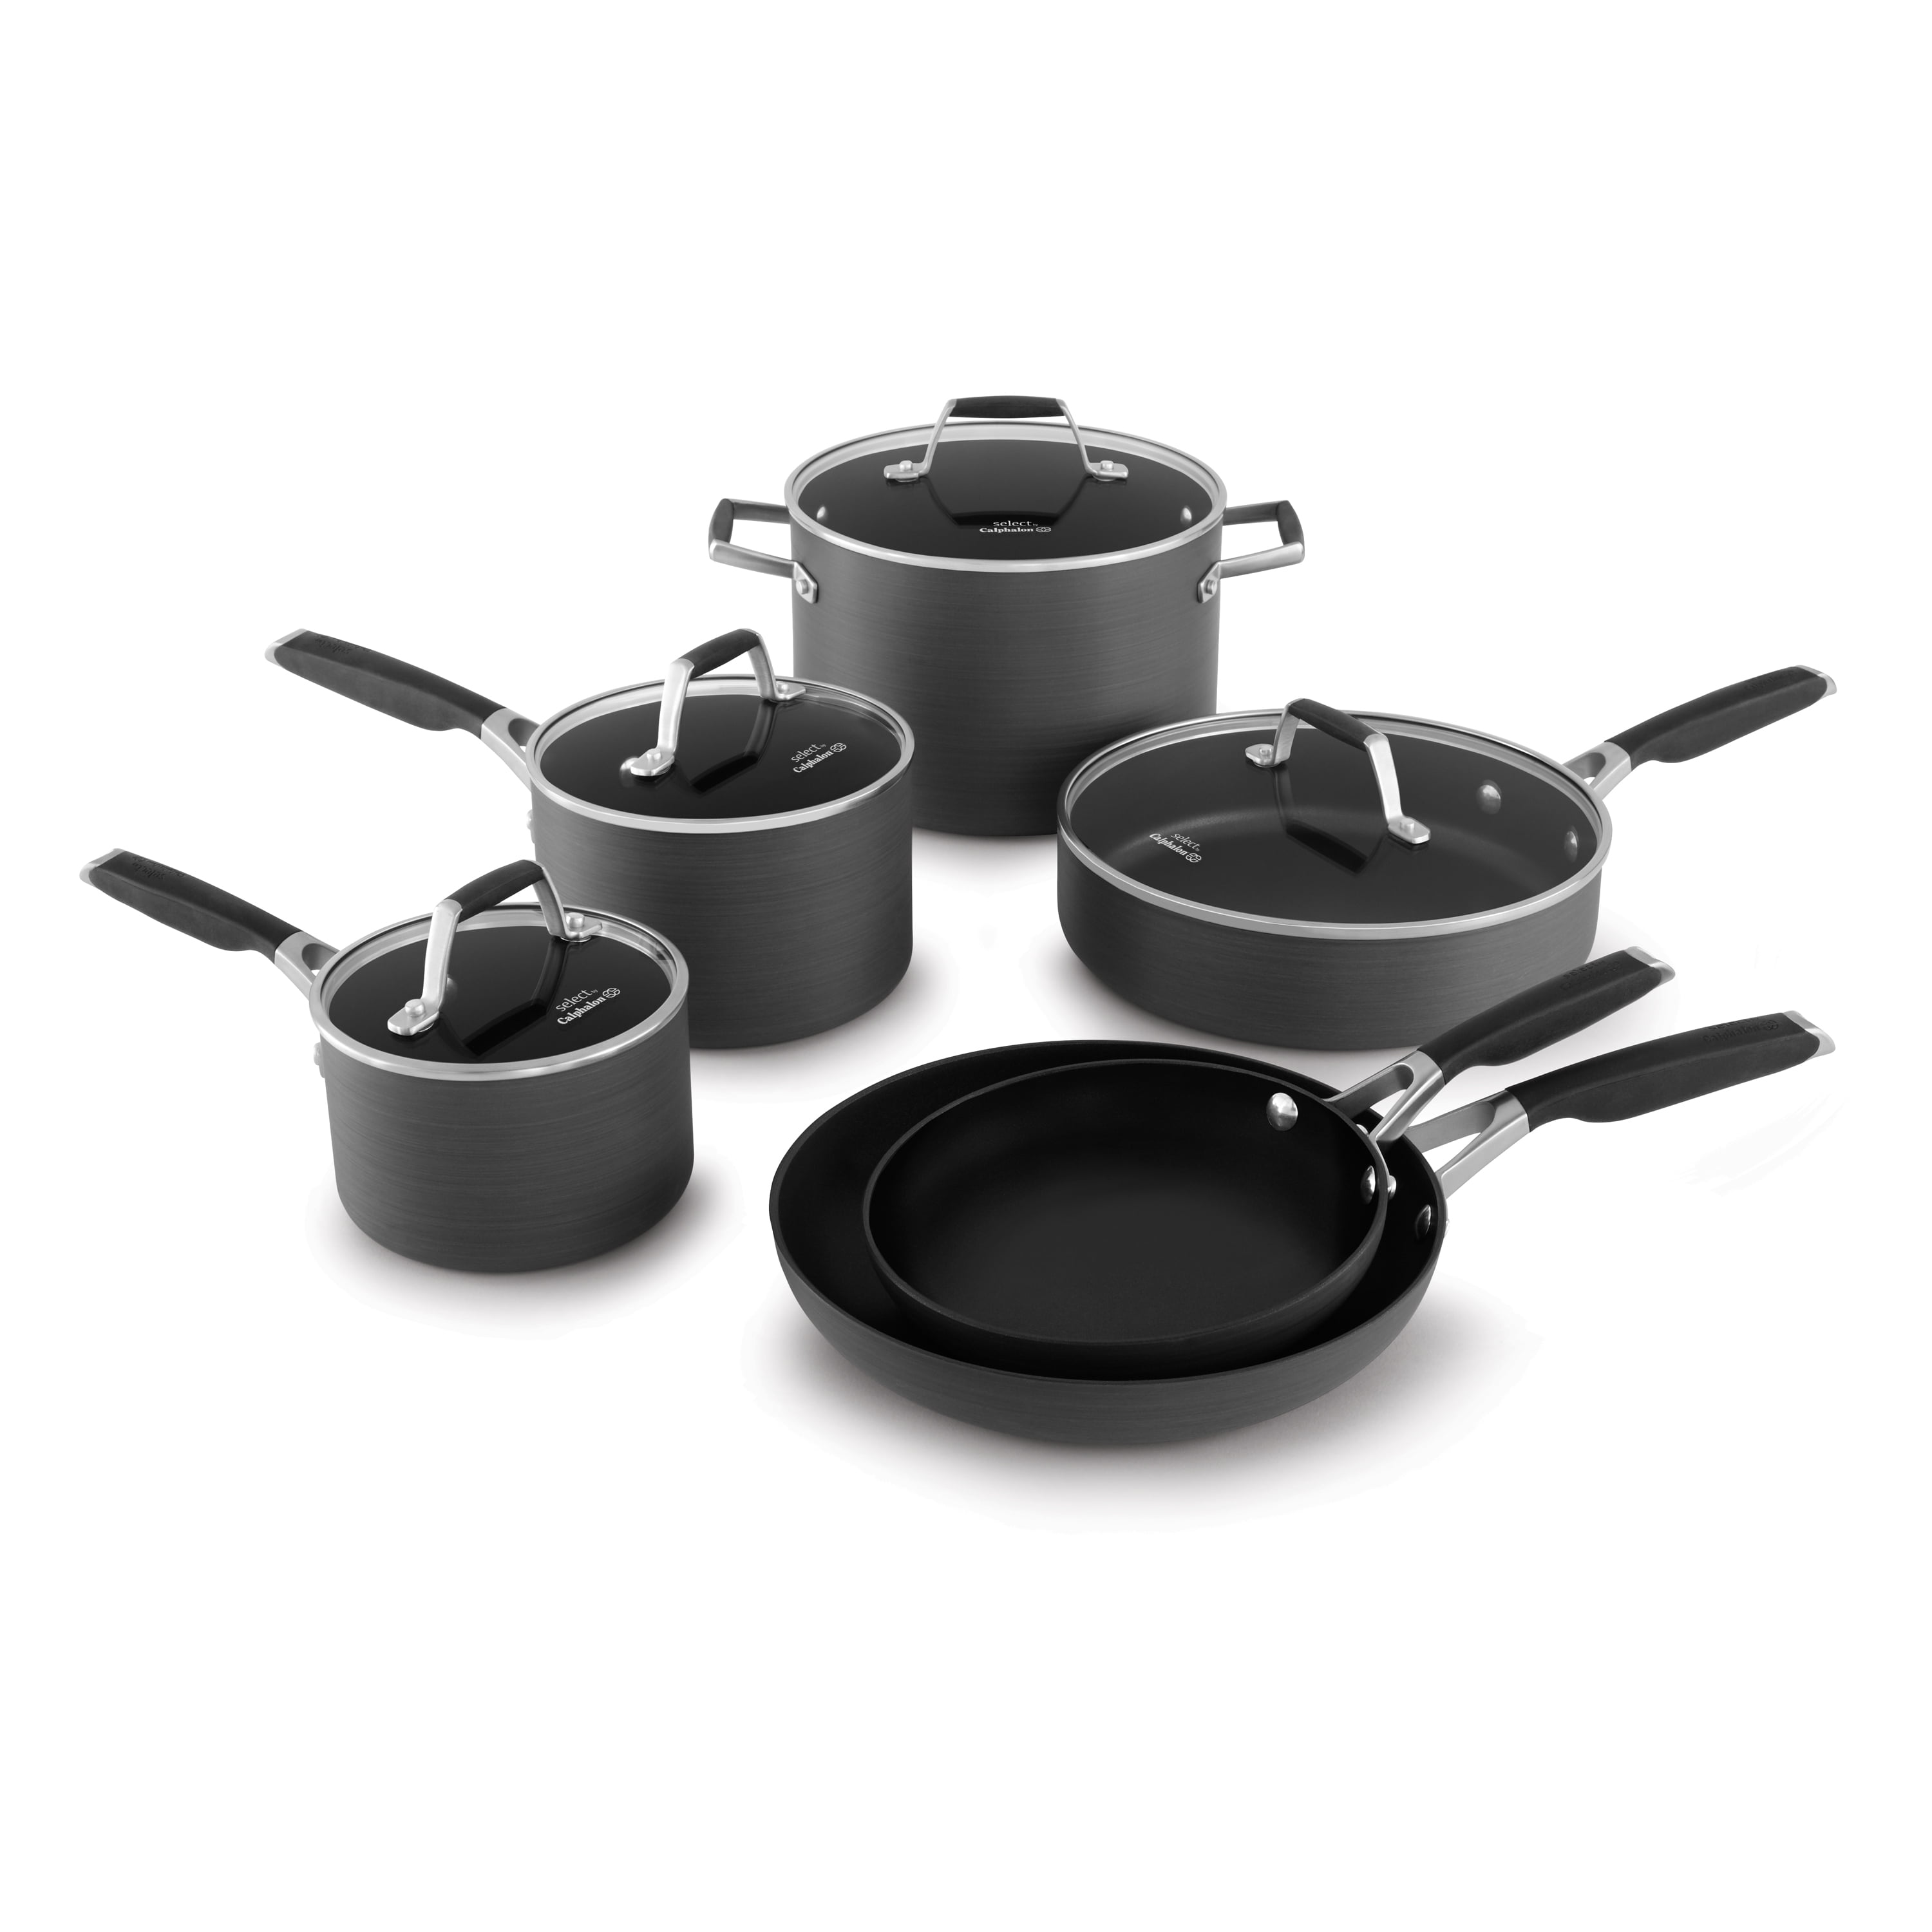 Select by Calphalon Hard-Anodized Nonstick 10-Piece Cookware Set